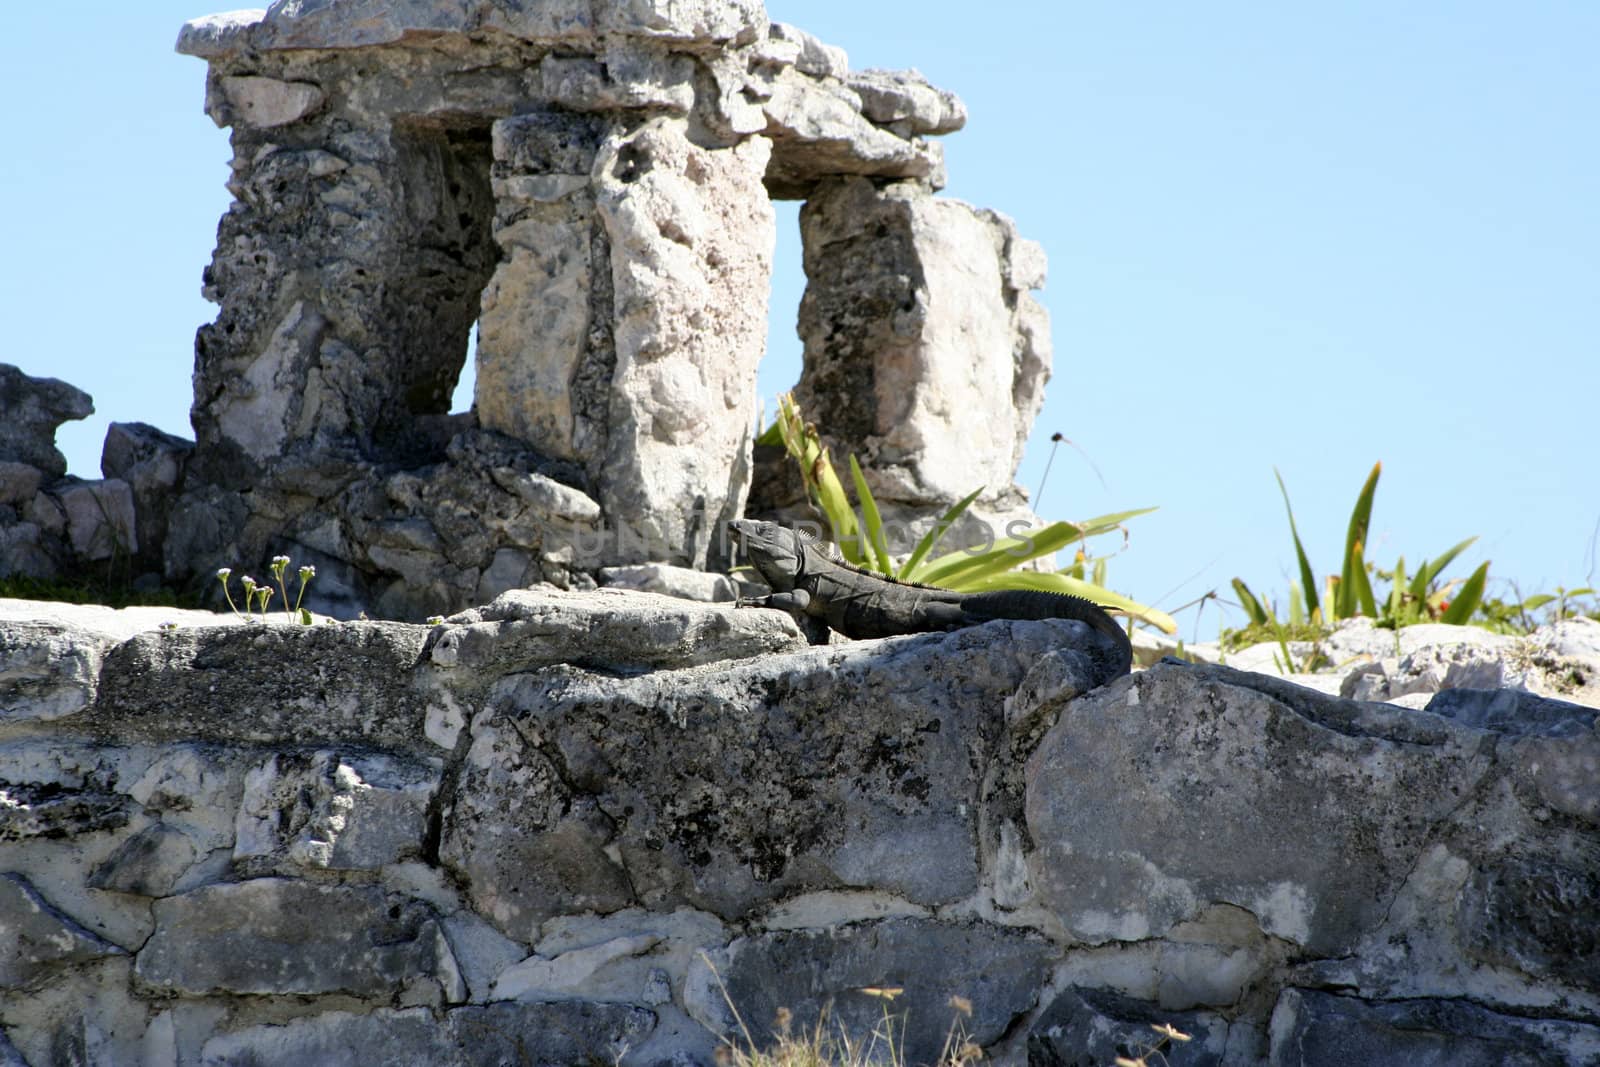 Lizard , reptile at one of the  ruins in tulum mexico
